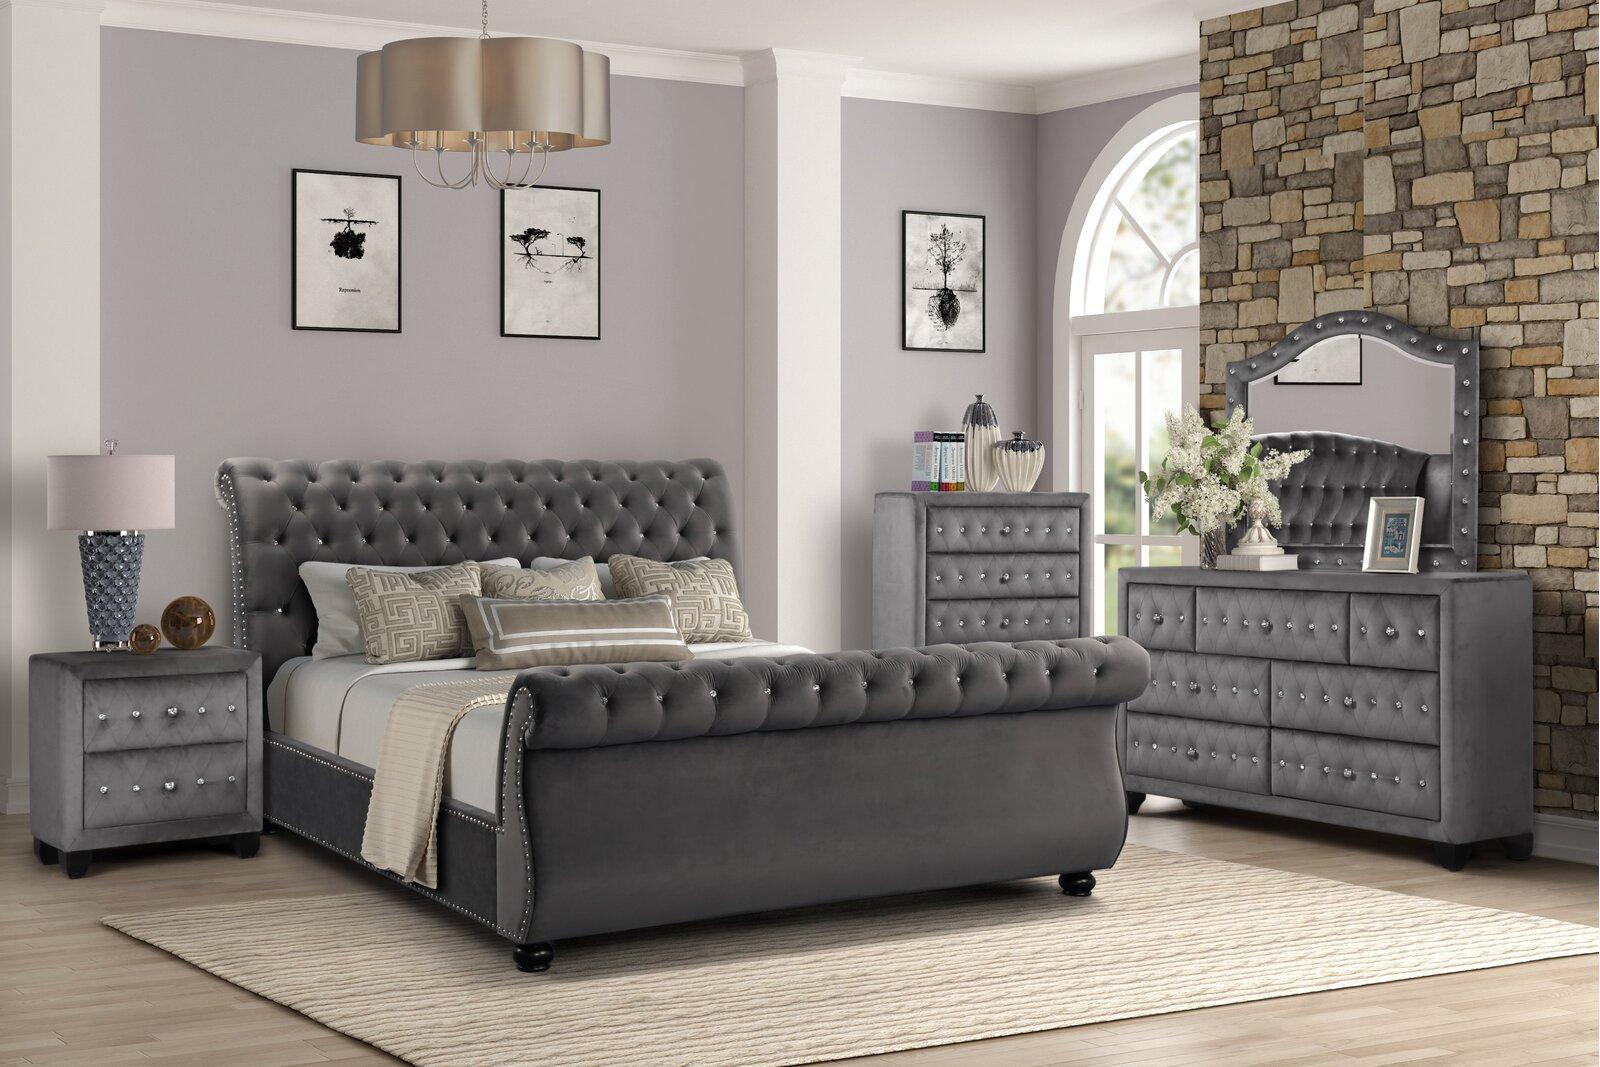 Contemporary, Modern Sleight Bedroom Set KENDALL GHF-808857701923-Set-5 in Gray 